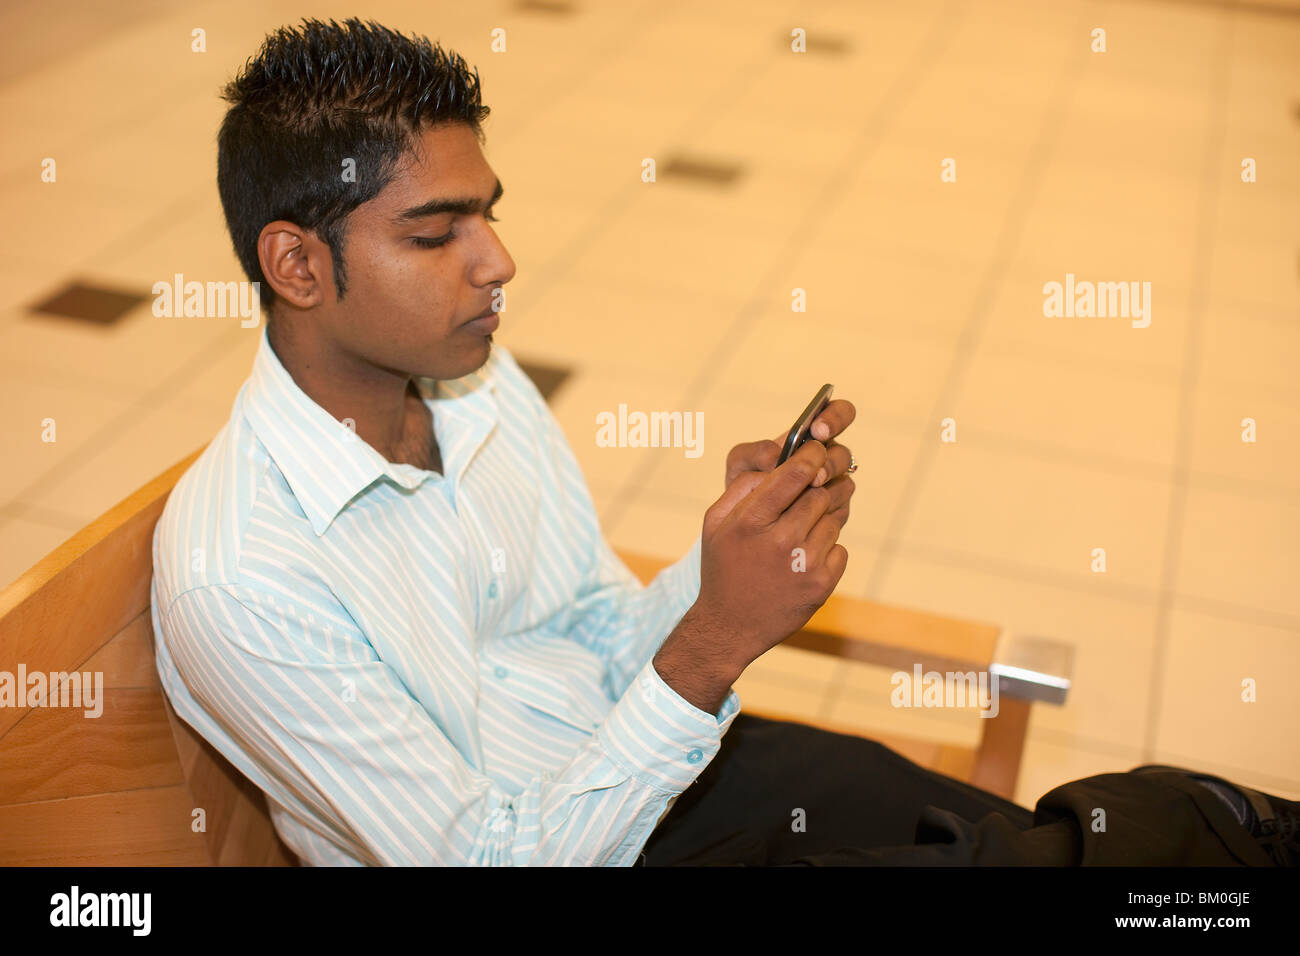 Man playing on cell phone in mall, KwaZulu Natal Province, South Africa Stock Photo